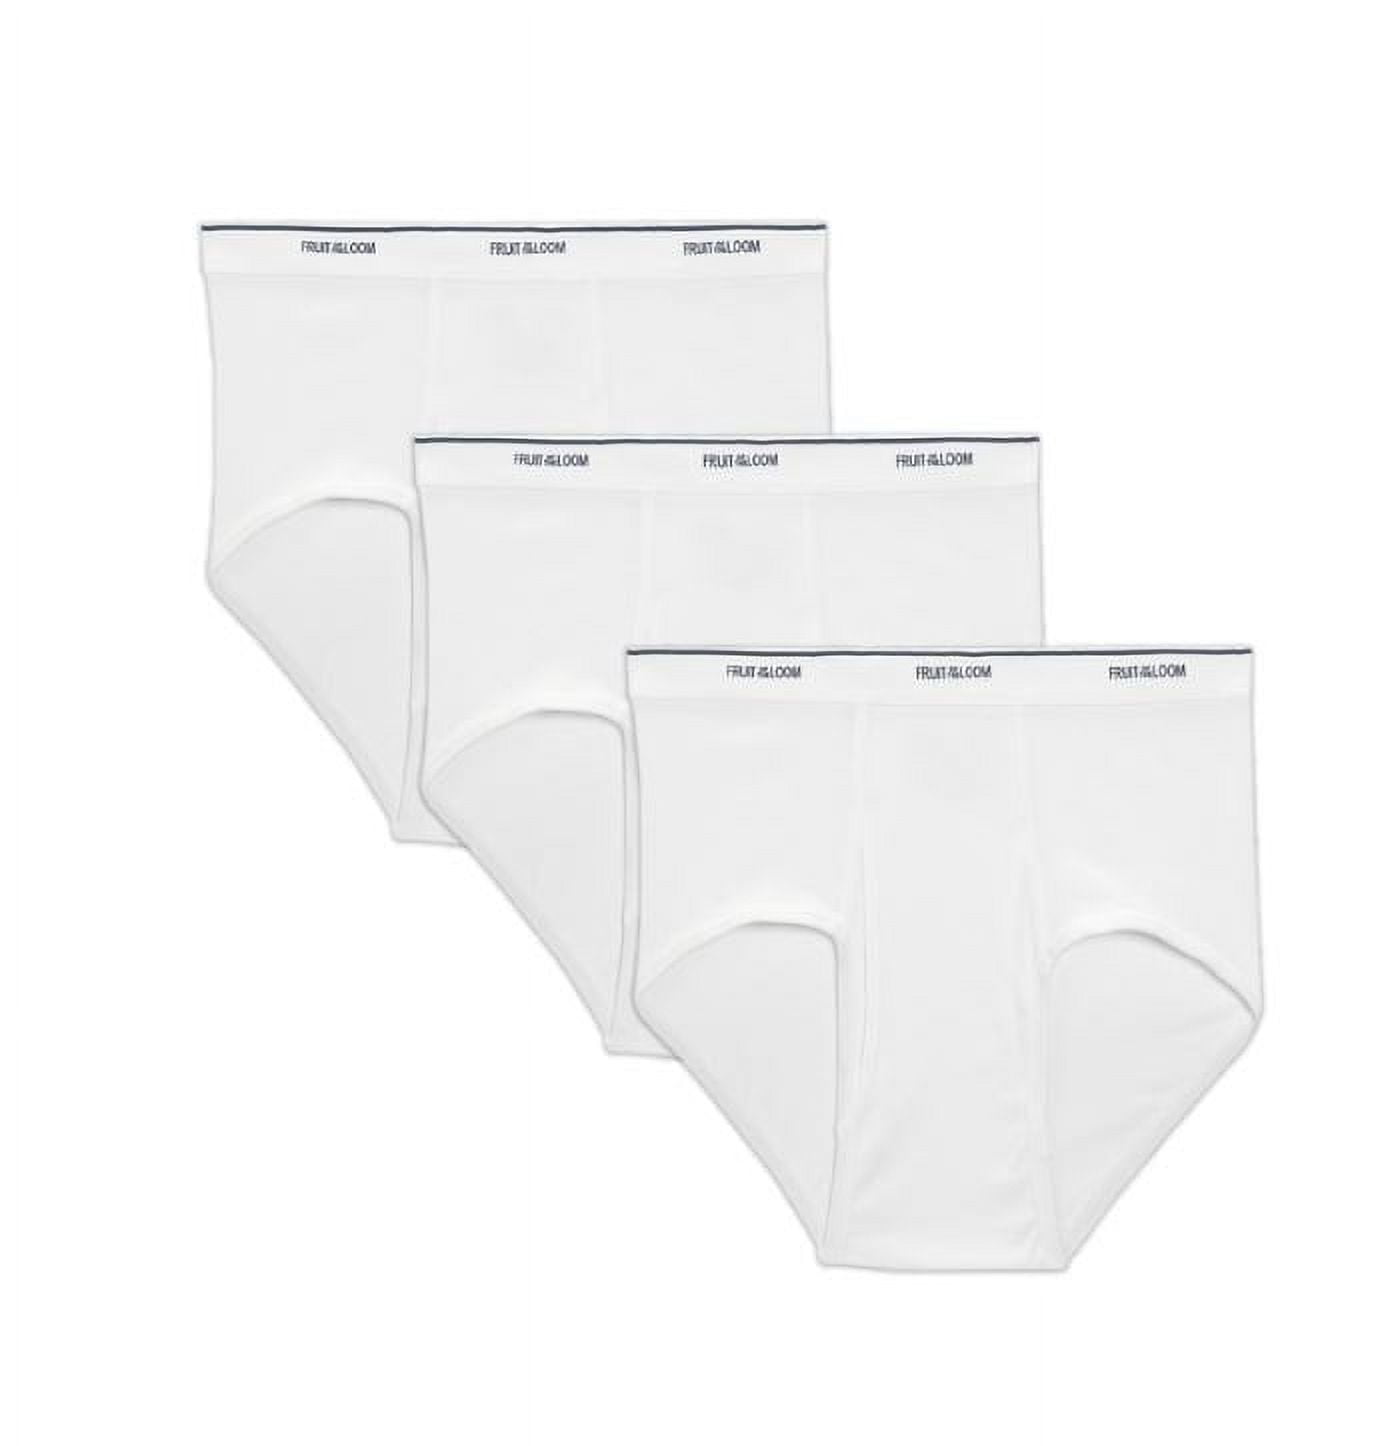 Fruit of the Loom Men's 100% Cotton Tagr Free White Classic Briefs